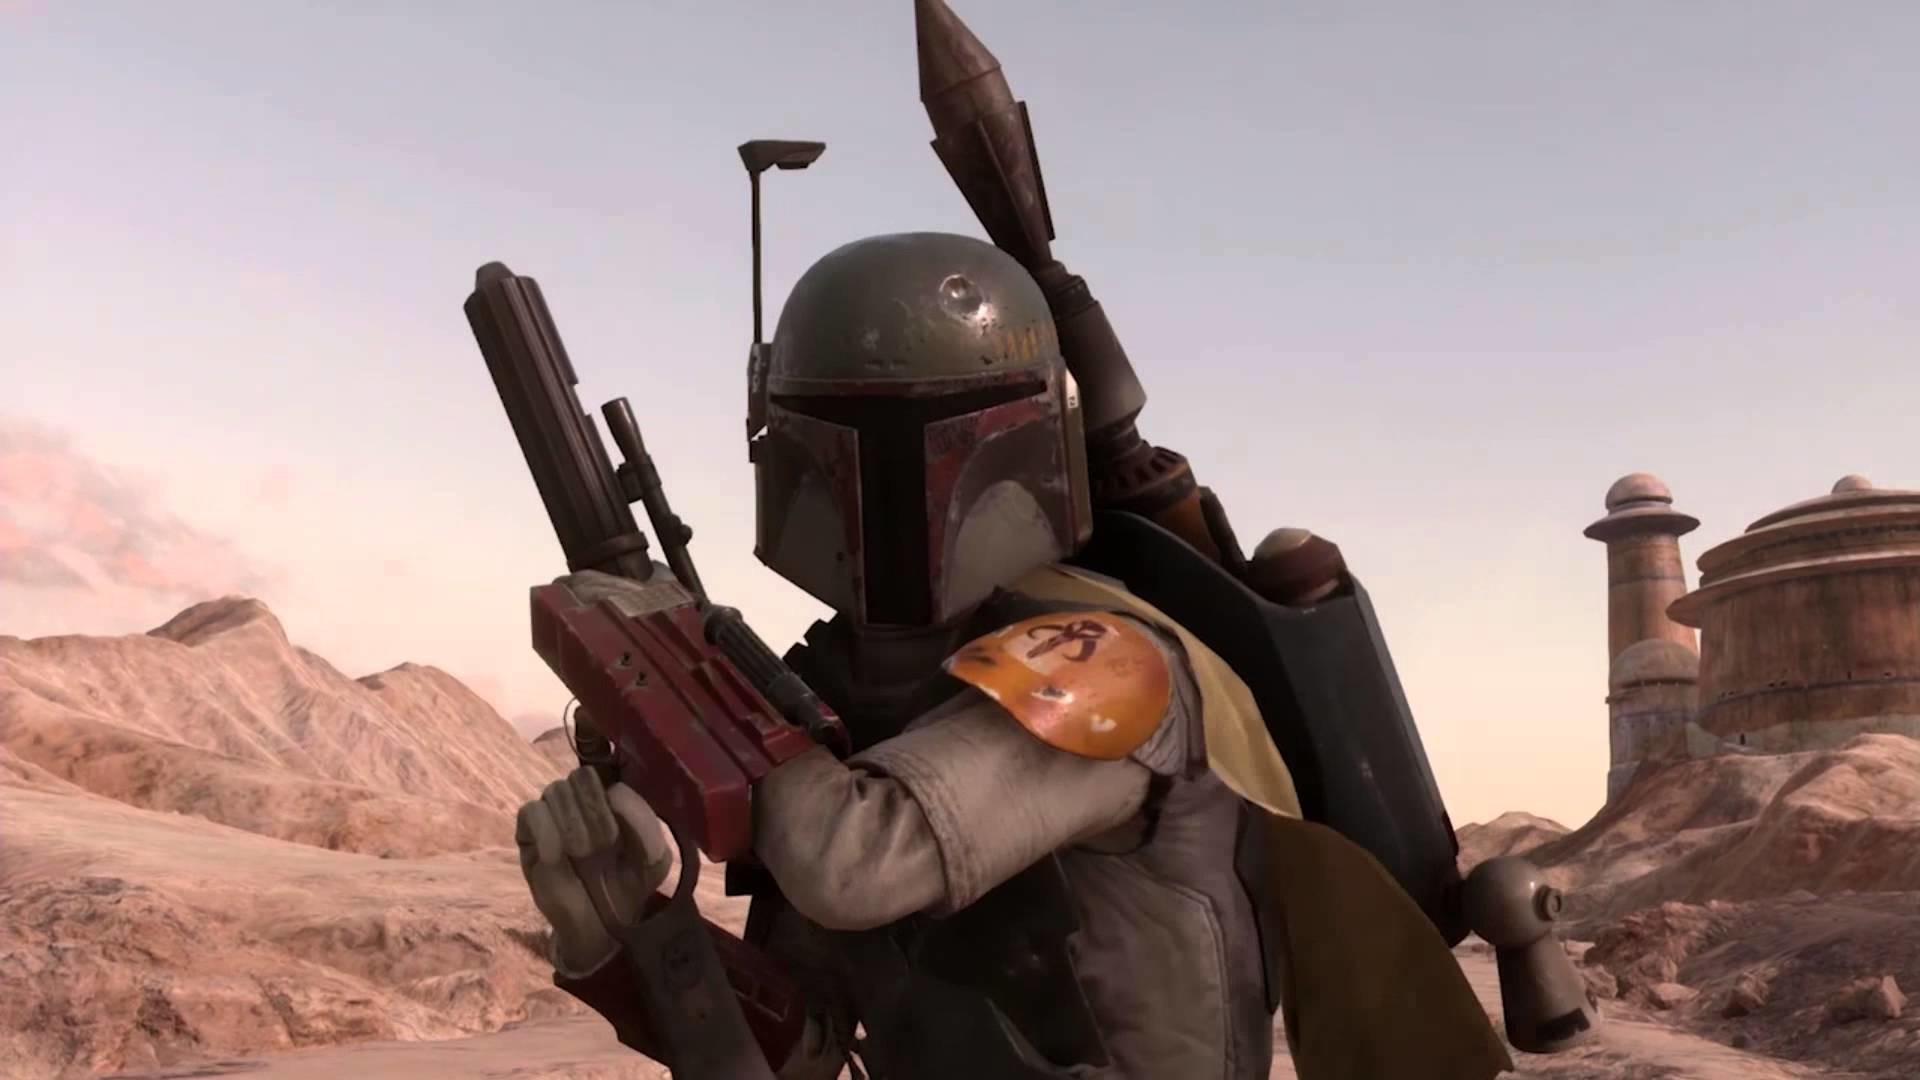 Star Wars Battlefront – NEW Tatooine Gameplay Boba Fett, Leia, New Game Modes / Weapons – YouTube